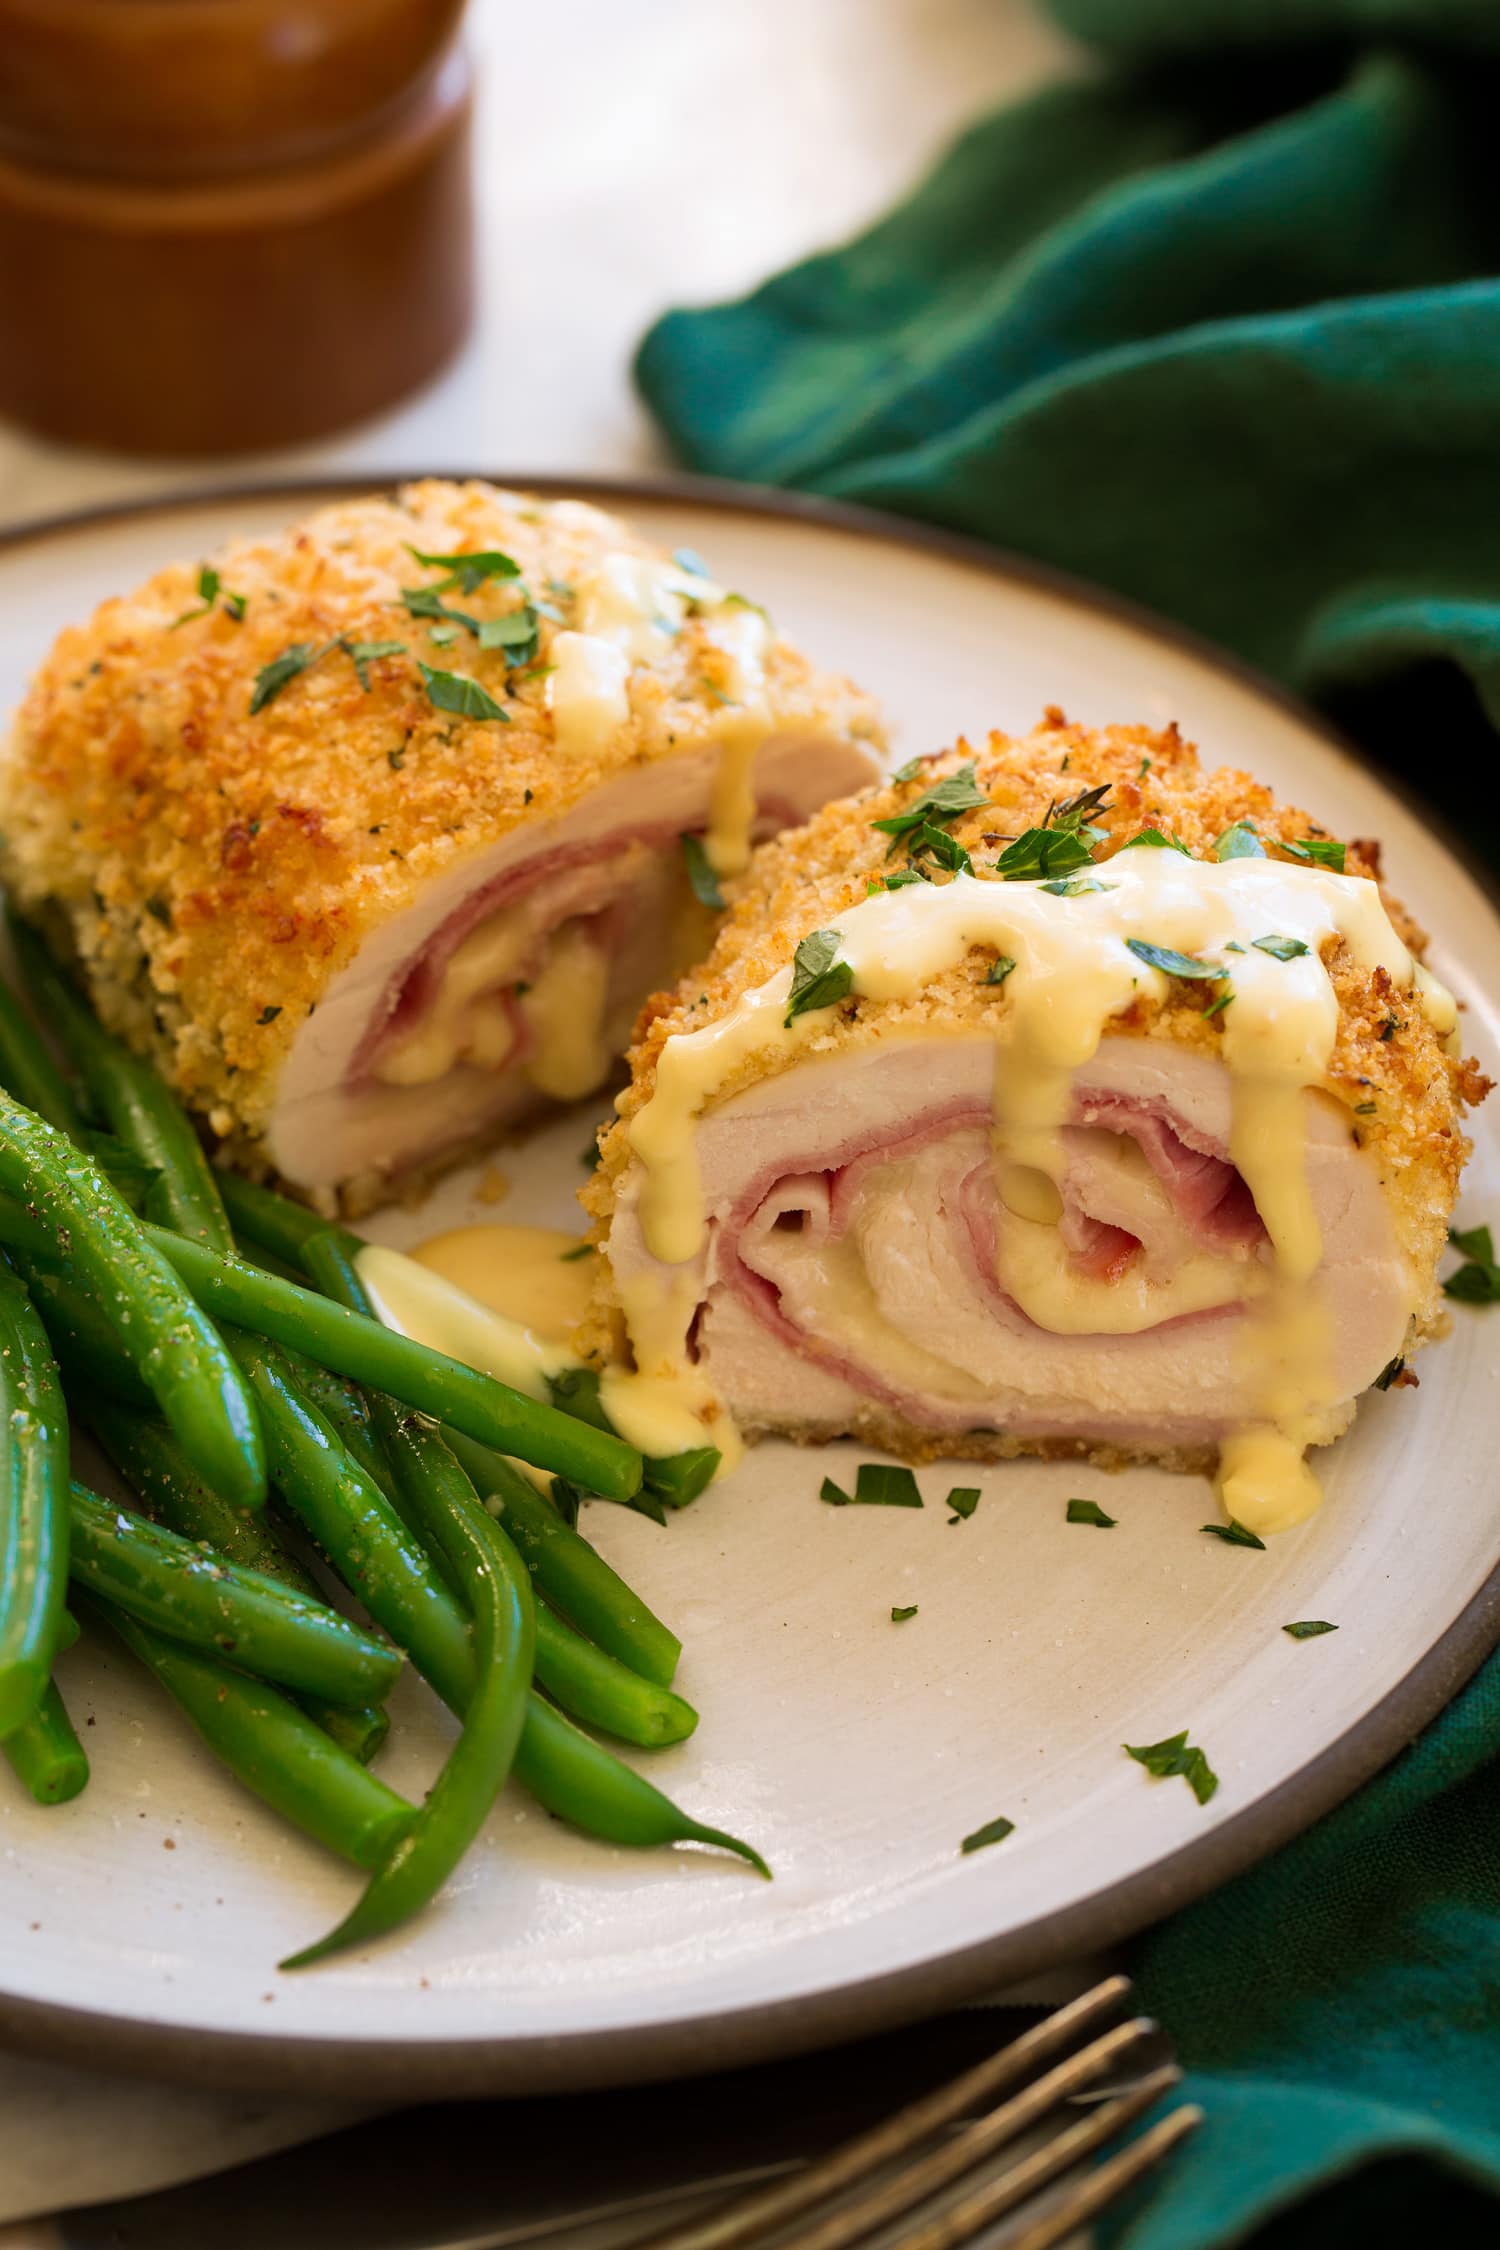 Chicken Cordon Bleu shown sliced in half with sauce on top. Green beans shown to the side.